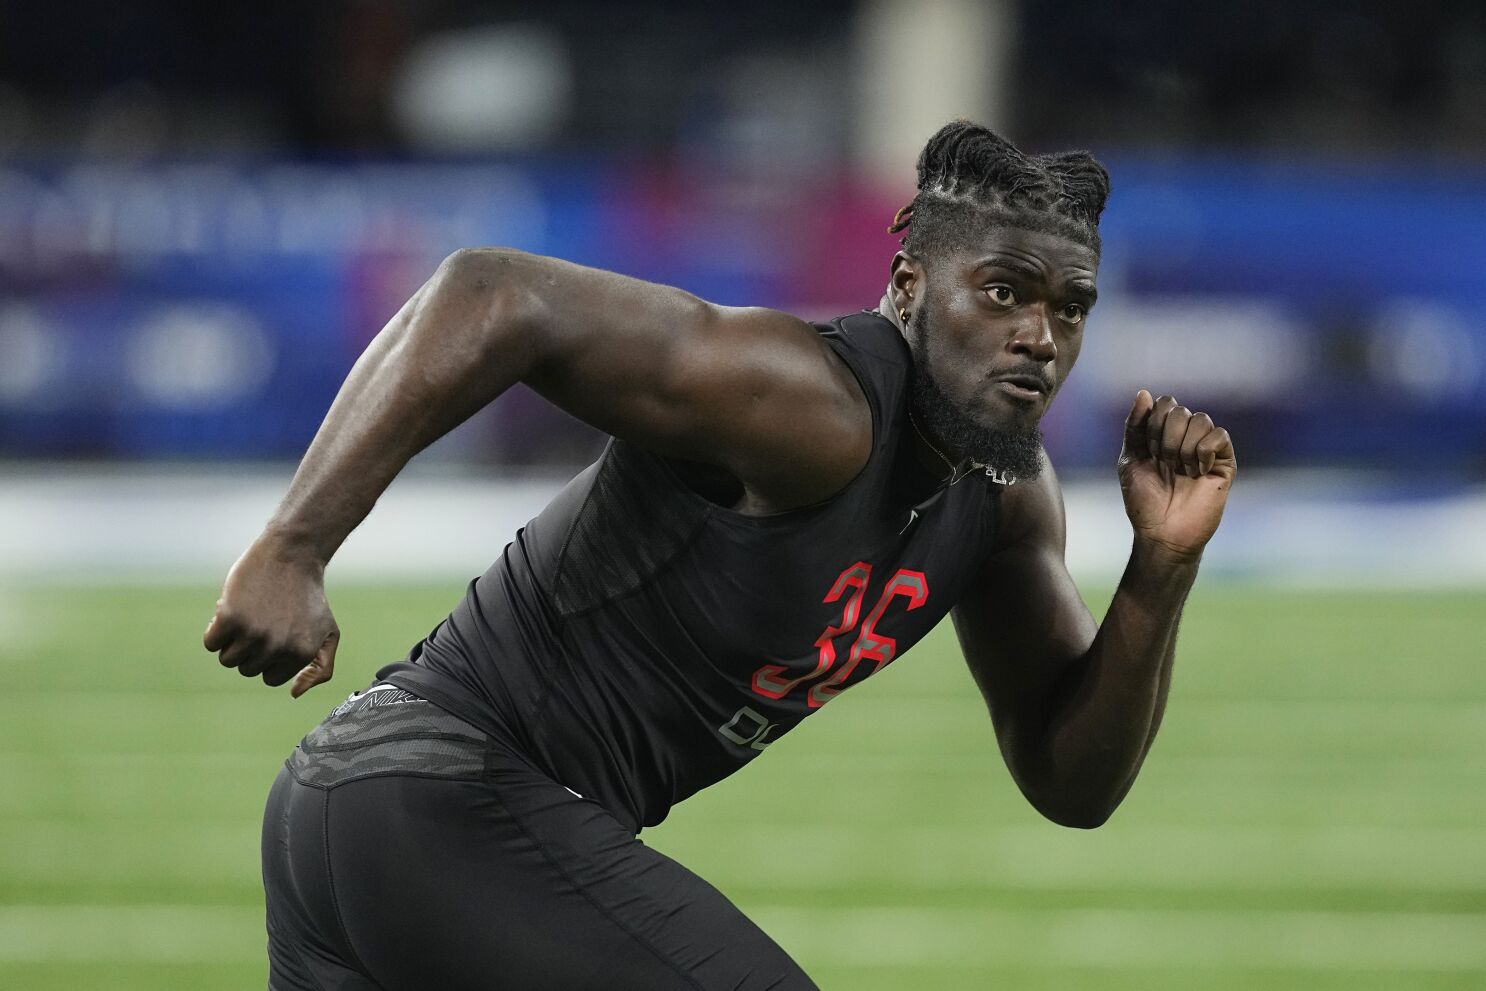 Will David Ojabo's injury keep star Michigan pass rusher out of 2022 NFL  Draft's first round?